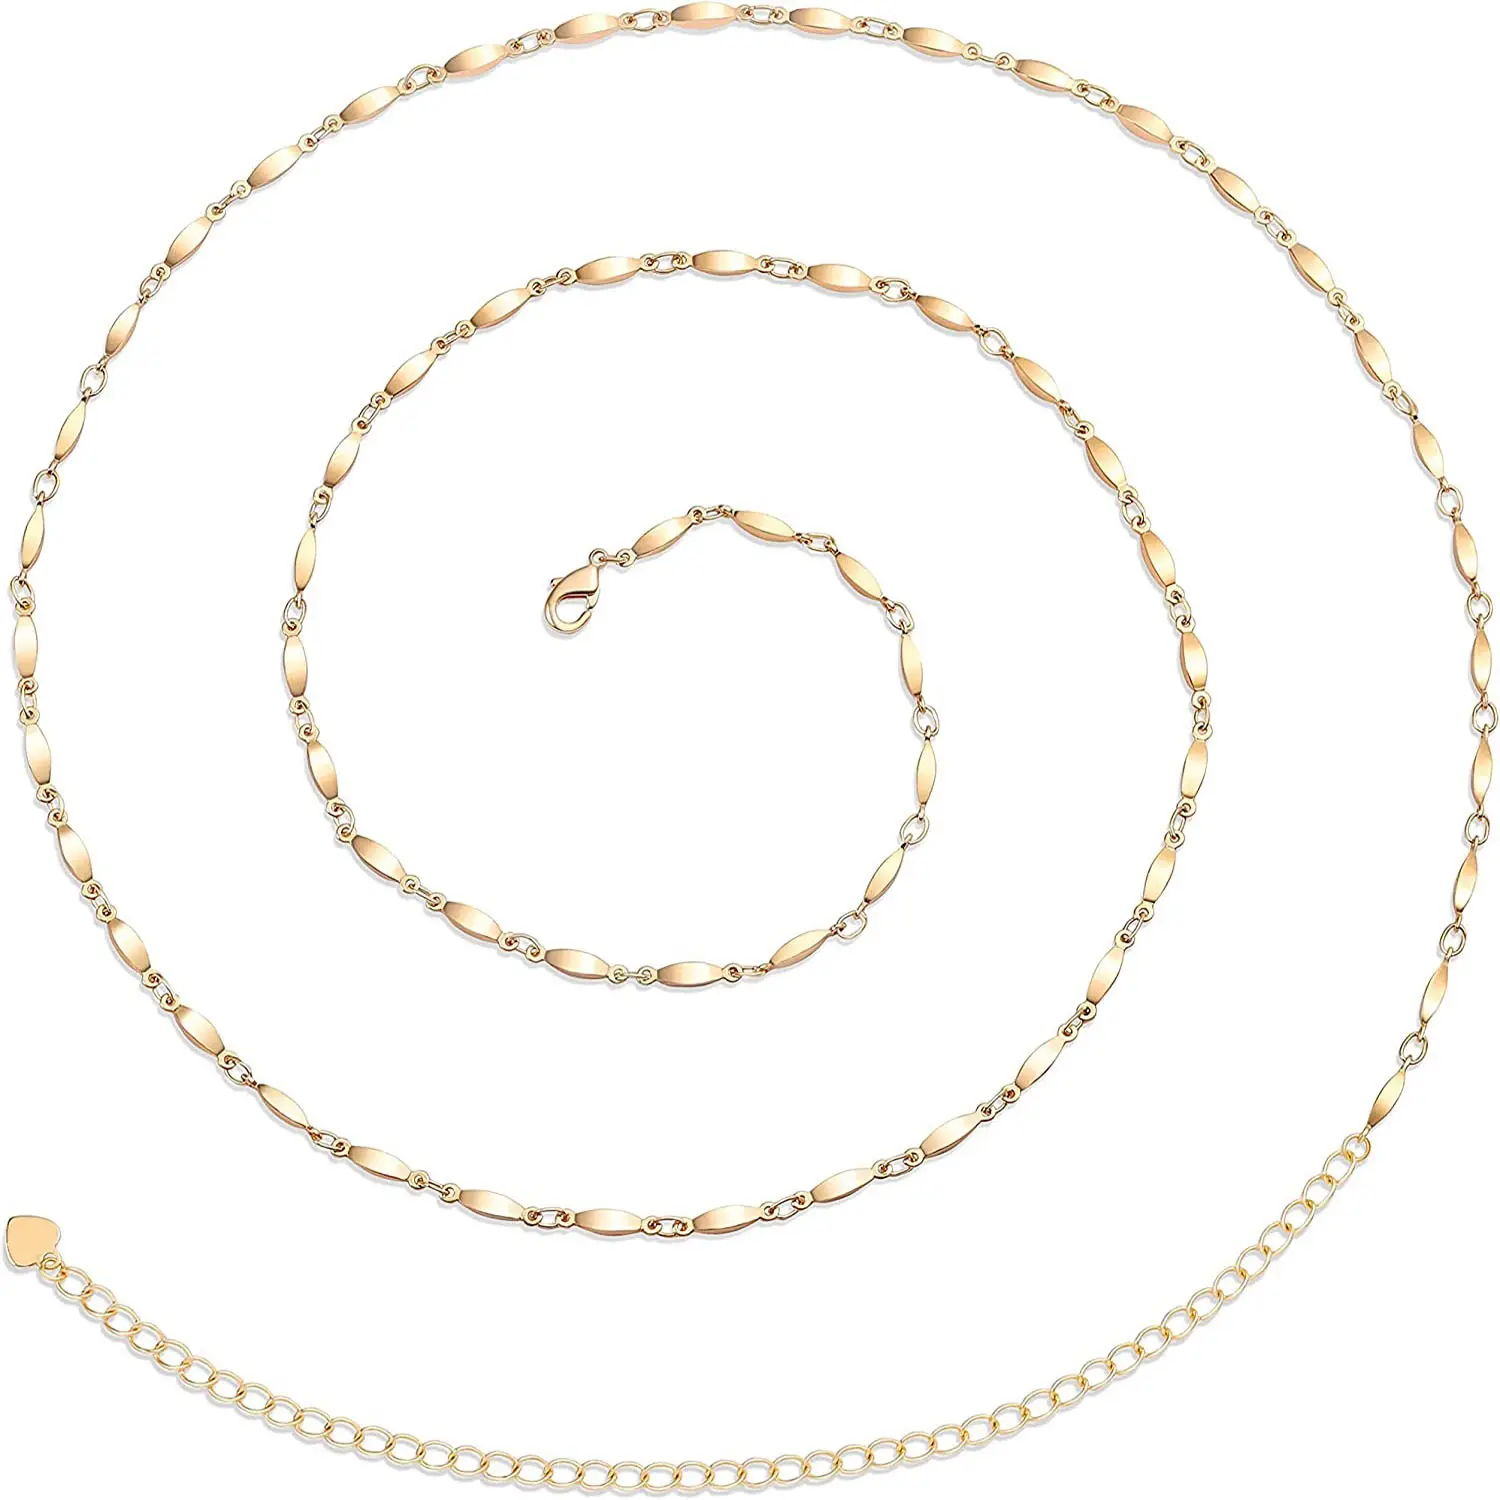 Wholesale 18k Gold Plated Fashion High Quality Jewelry Serpentine Sexy Belt Body Chain For Anniversaries.